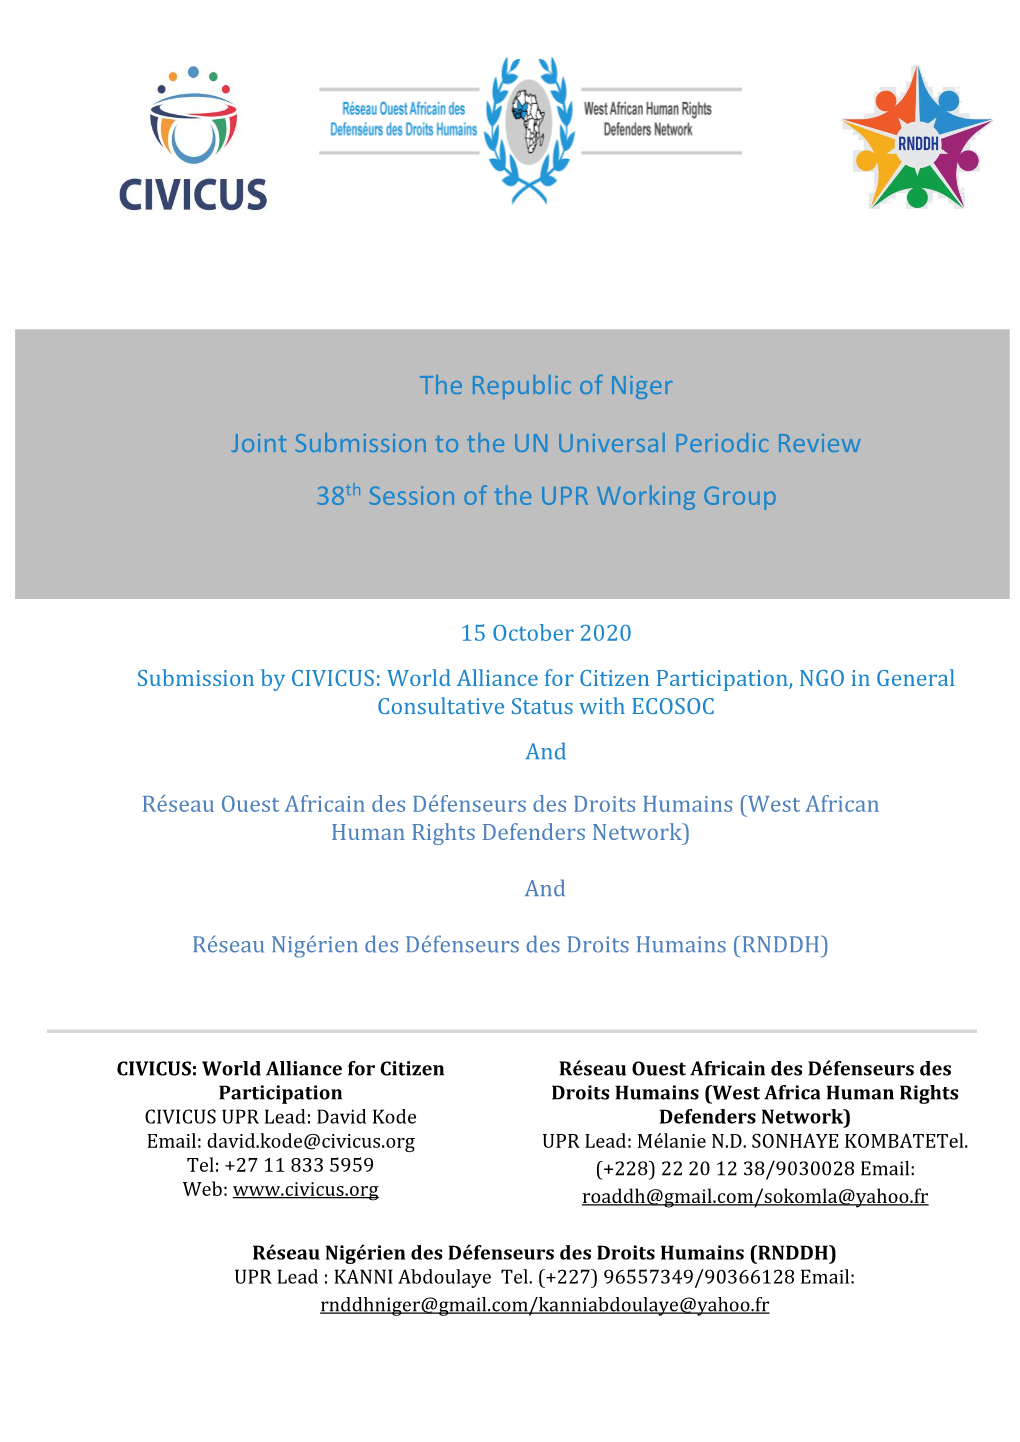 The Republic of Niger Joint Submission to the UN Universal Periodic Review 38Th Session of the UPR Working Group